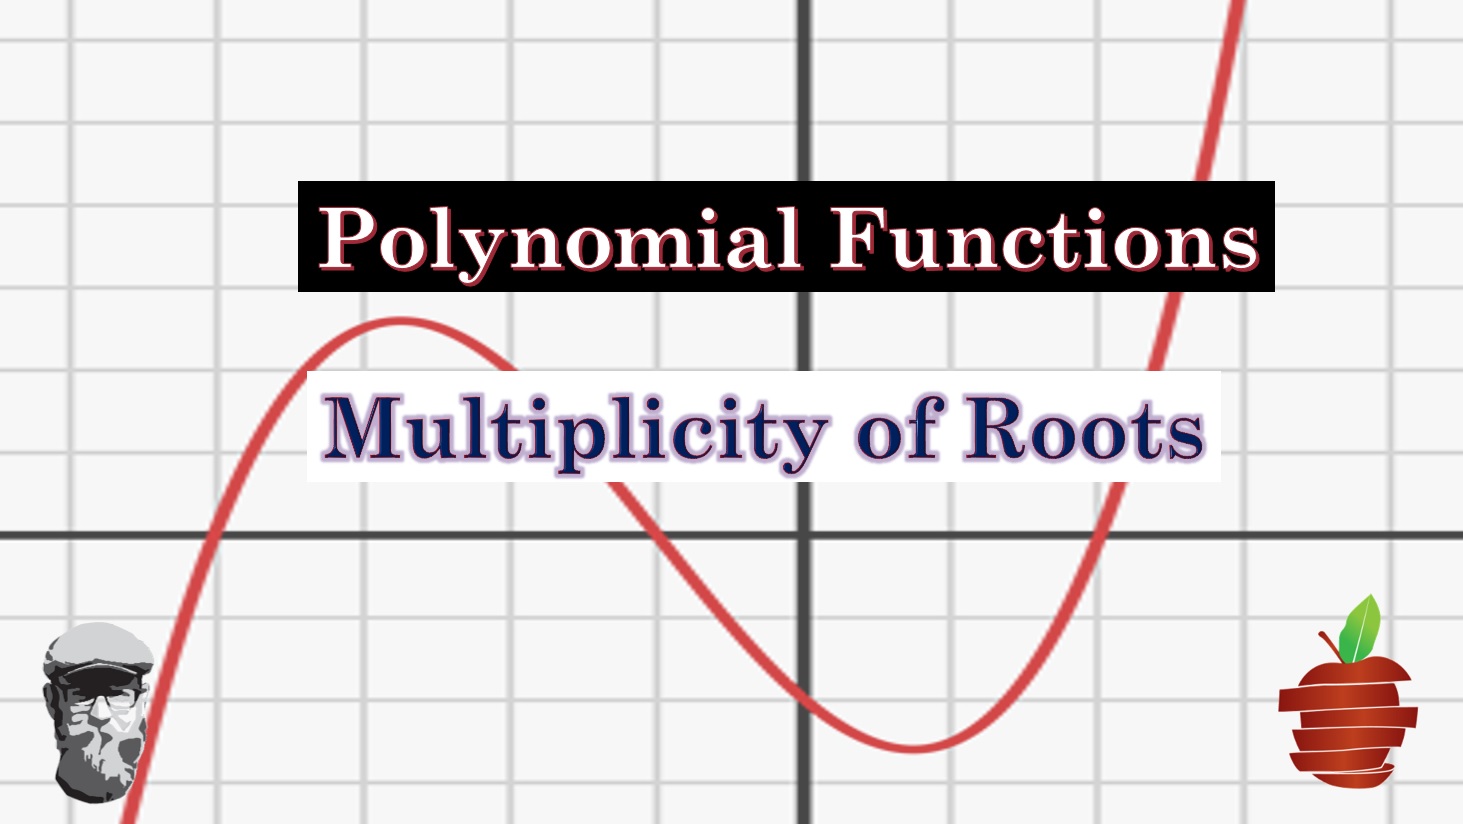 multiplicity-of-solutions-to-polynomial-functions-the-bearded-math-man